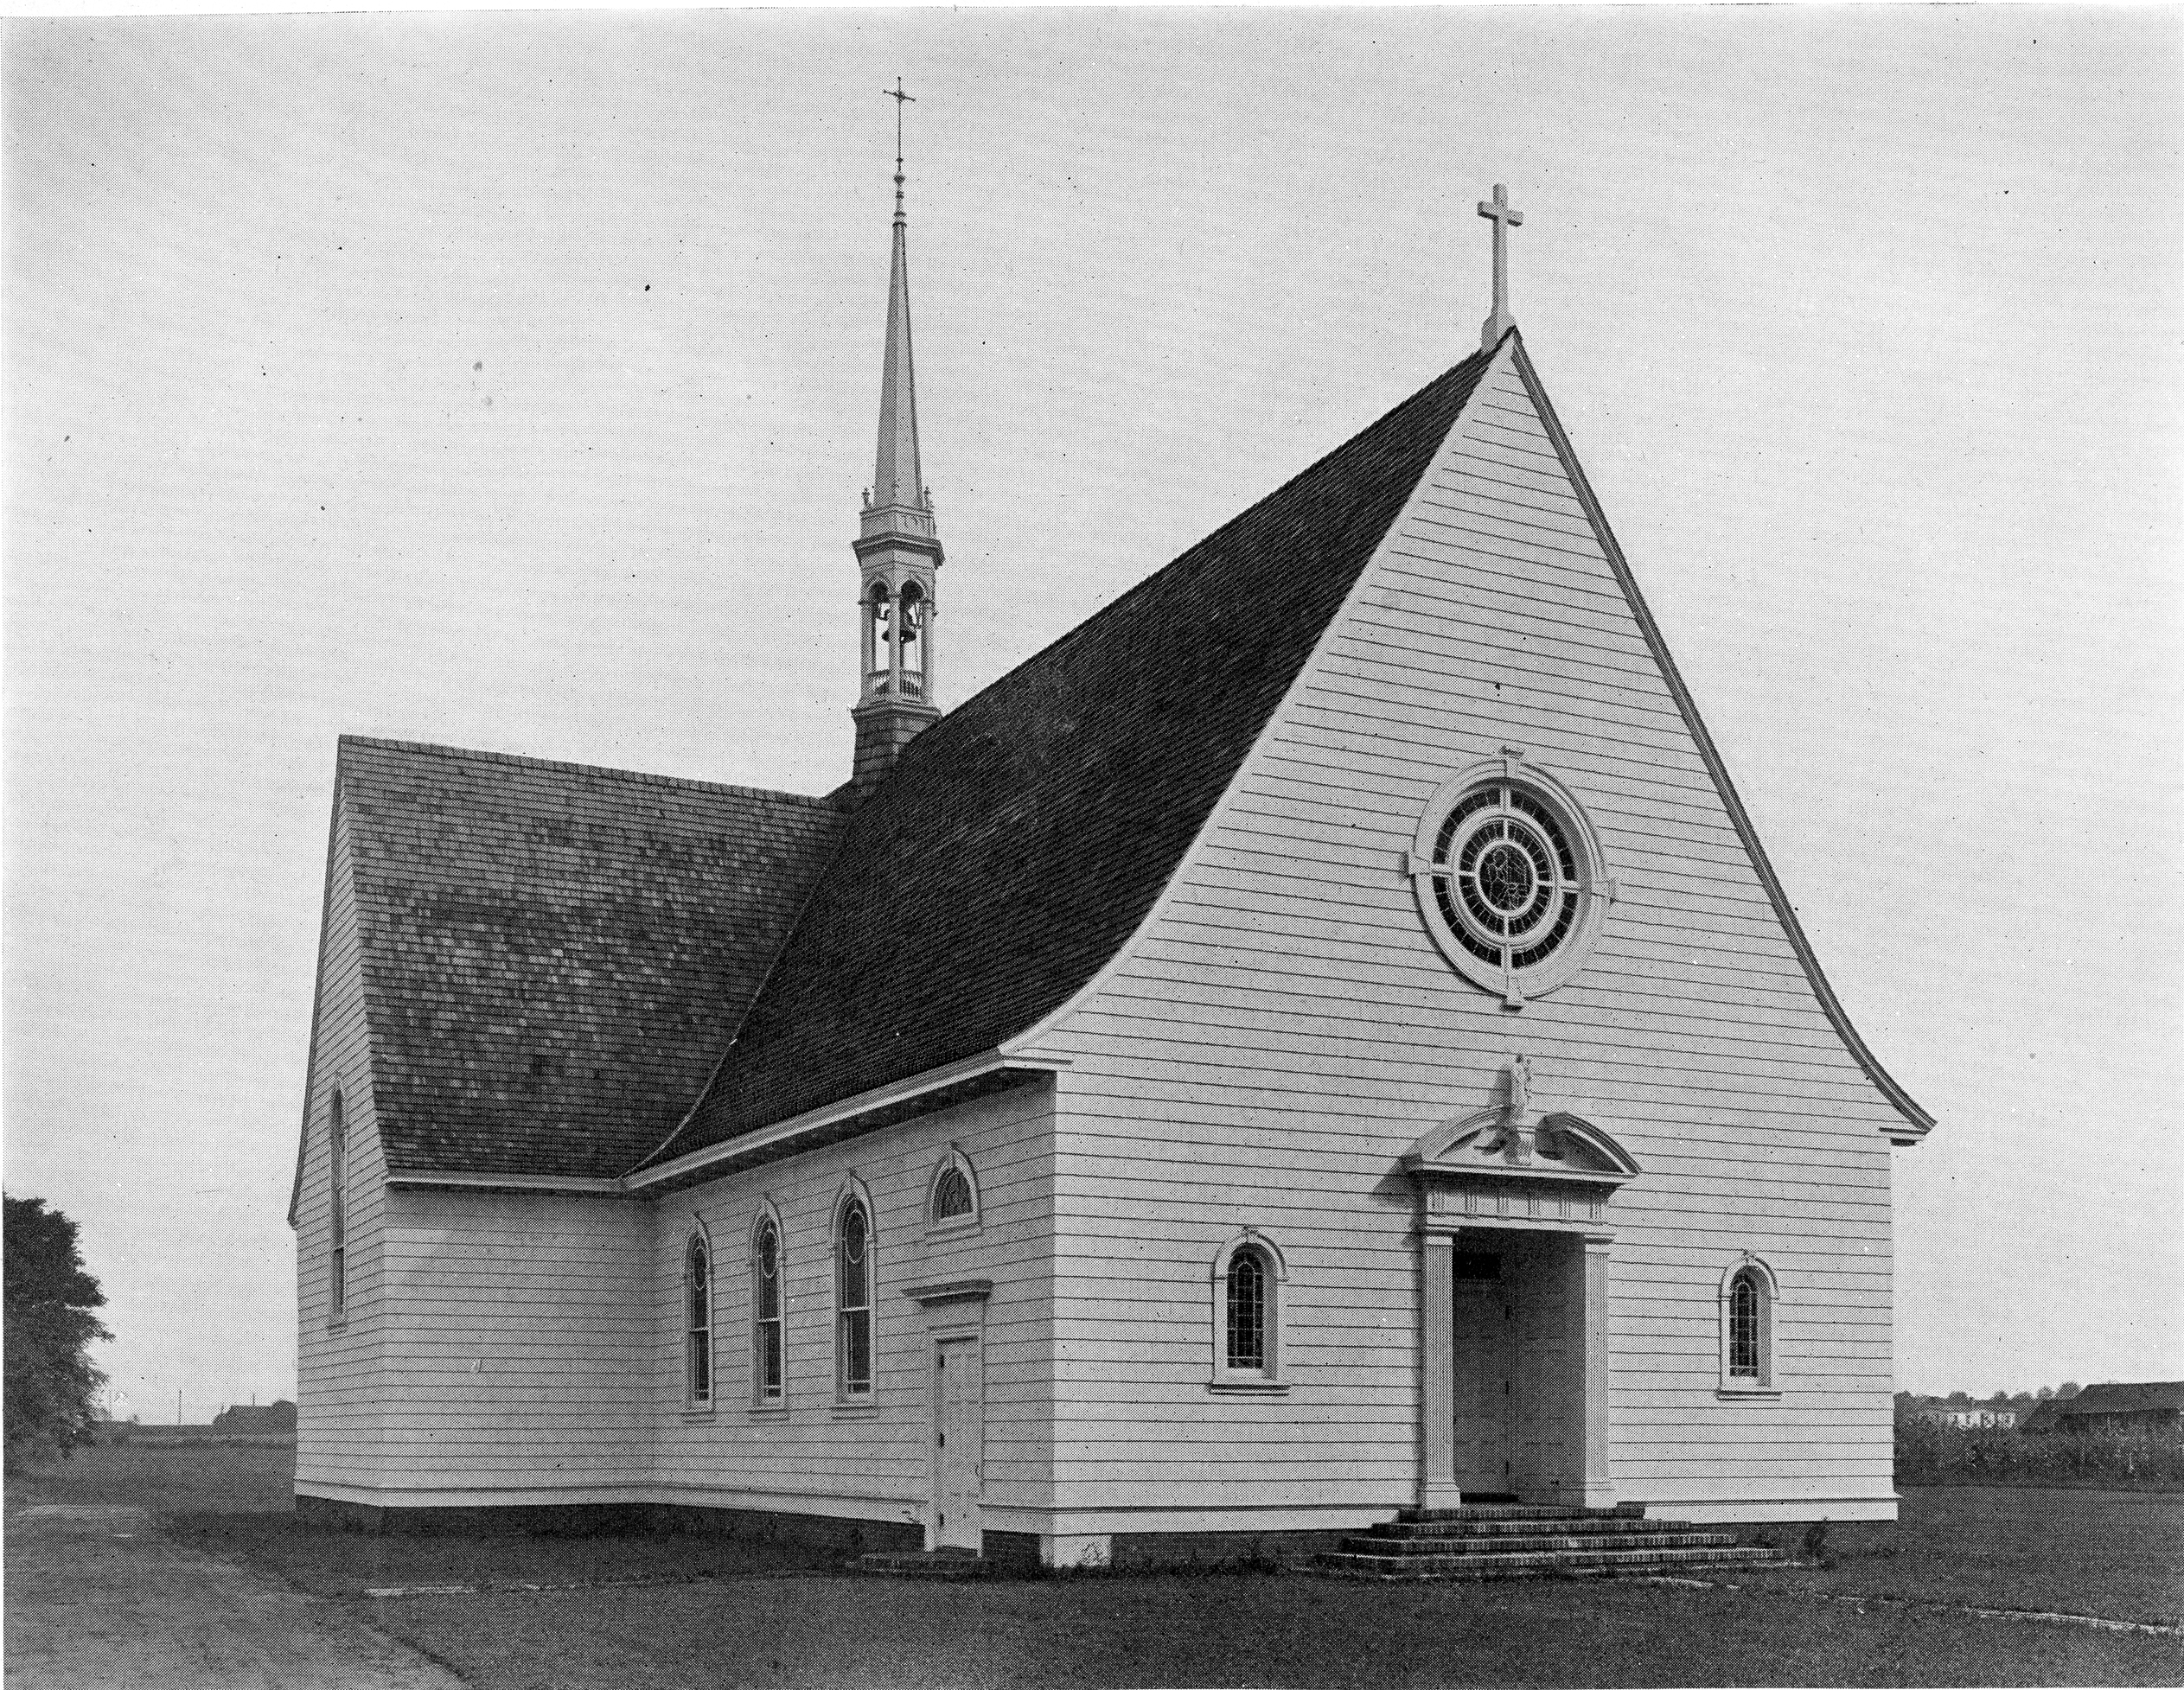 An early photograph of Queen of the Most Holy Rosary Catholic Church in Bridgehampton from The American Architect. The bell steeple was blown of the church in the 1938 hurricane. COURTESY QUEEN OF THE MOST HOLY ROSARY